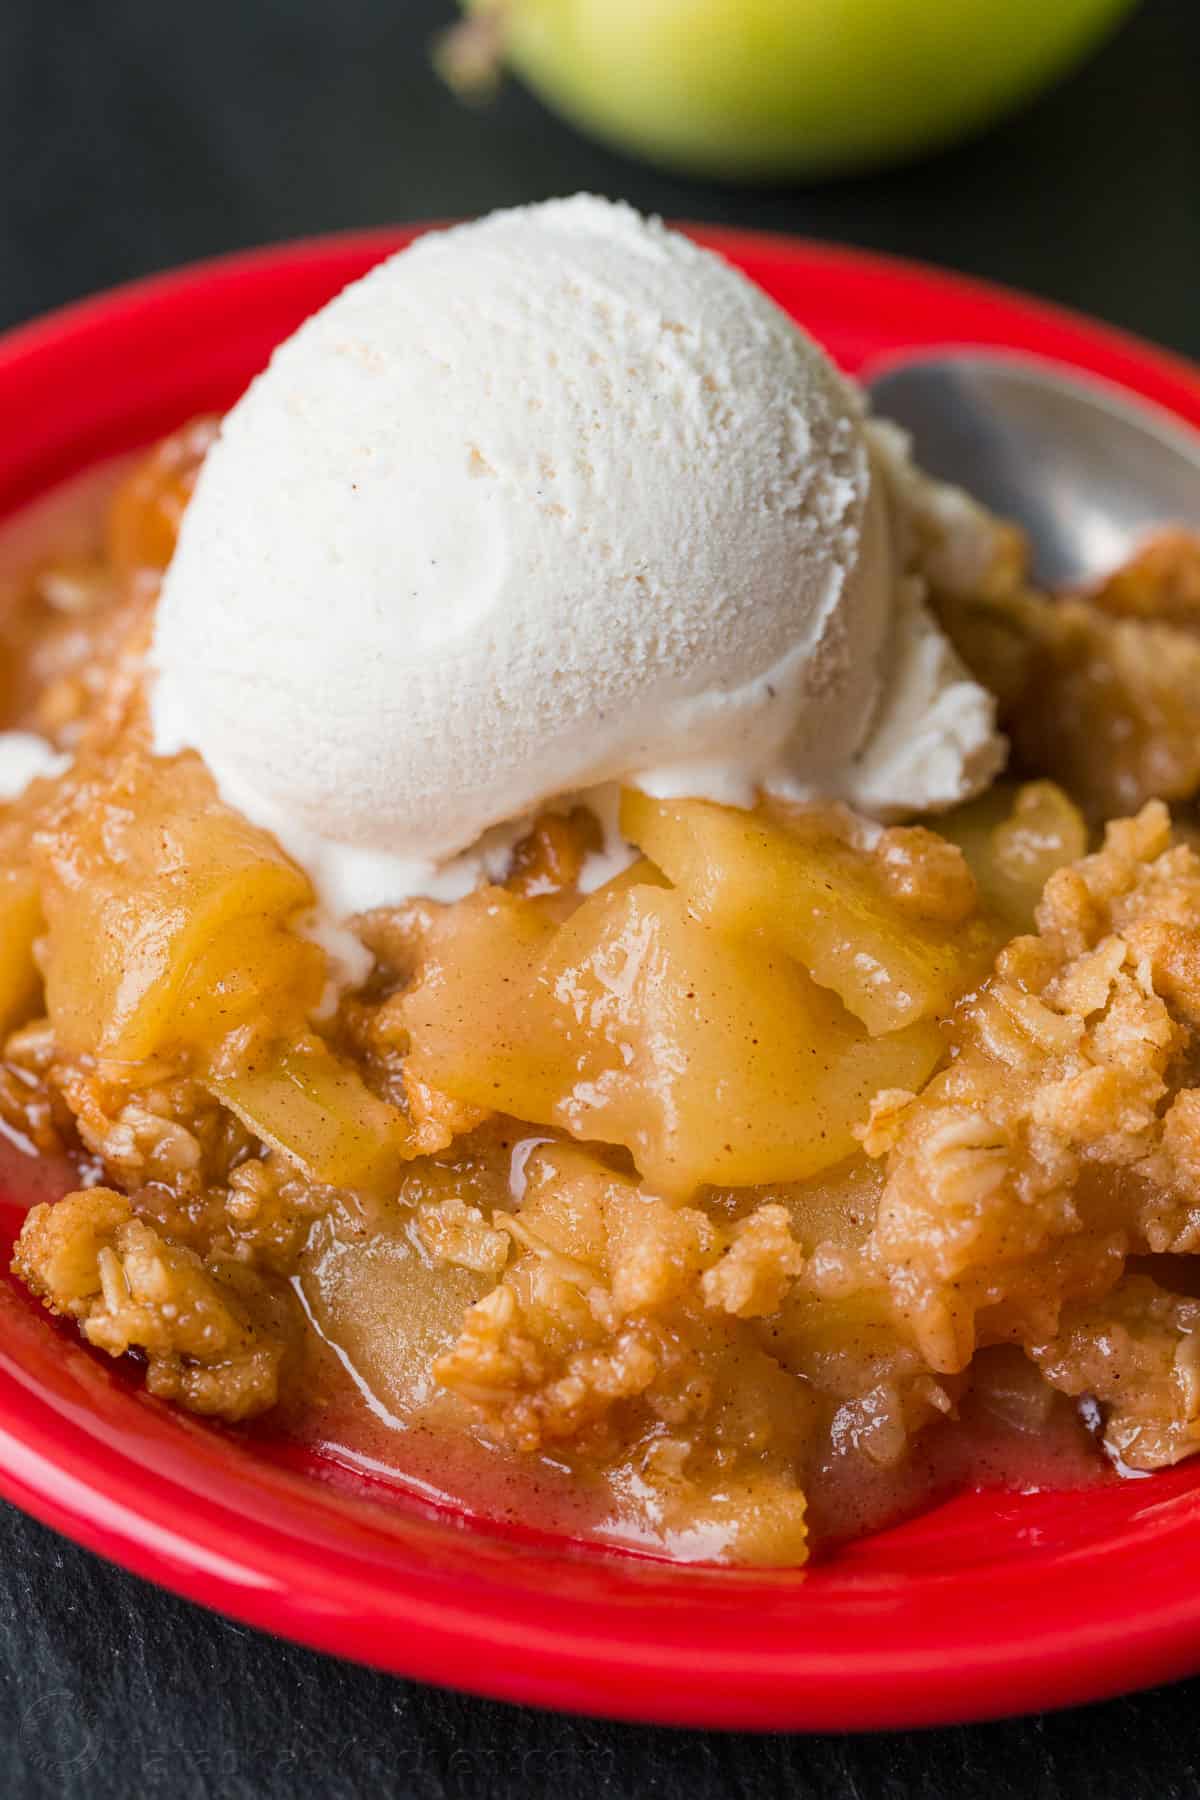 Plated apple crisp with apples, topping and vanilla ice cream